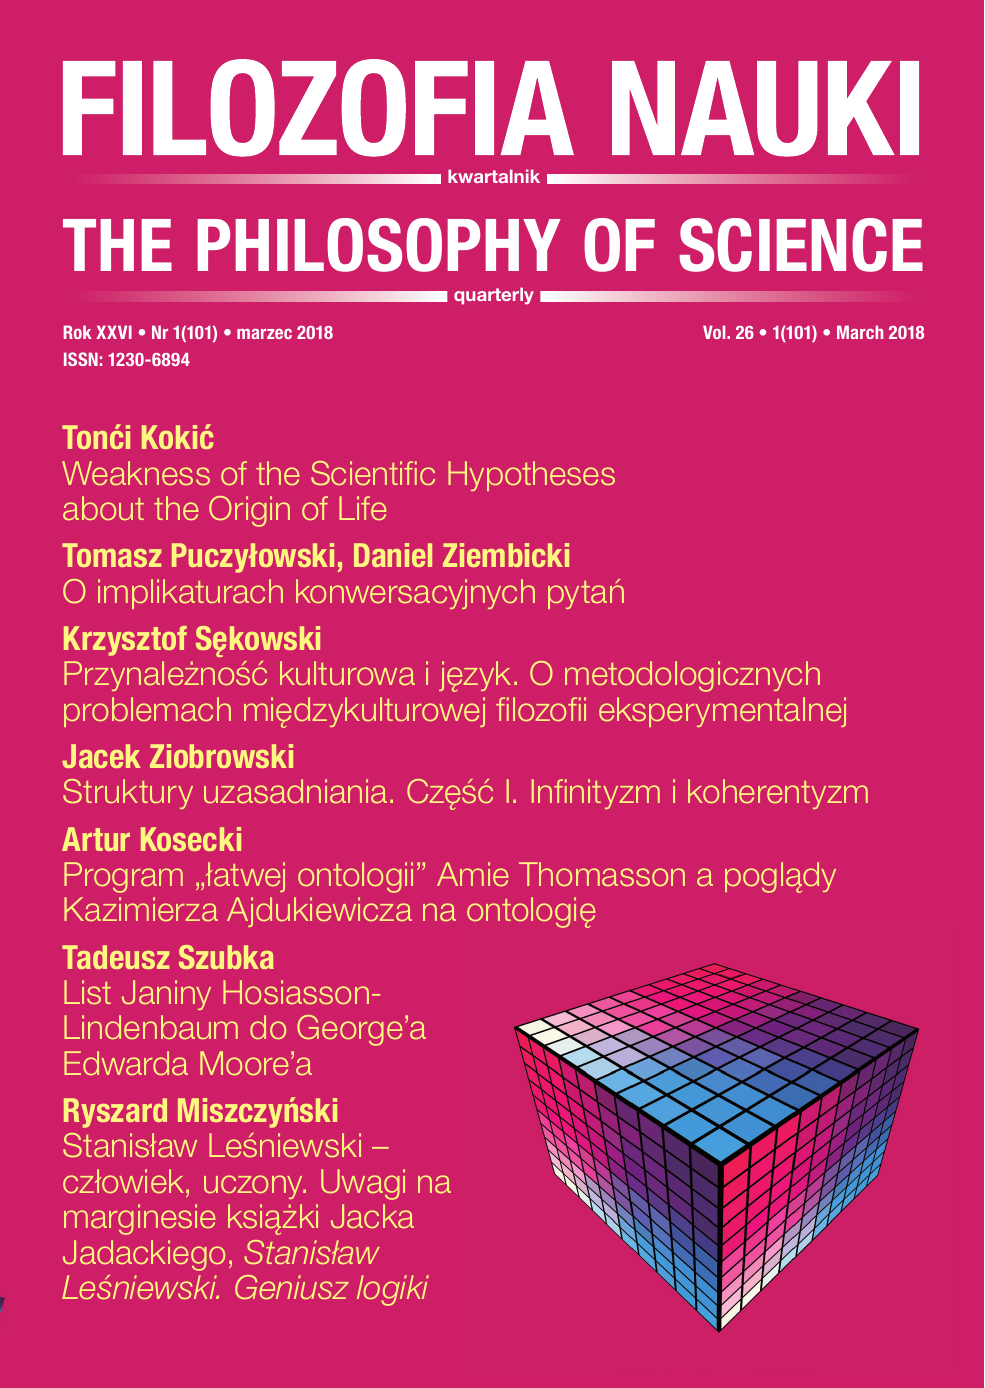 					View Vol. 26 No. 1 (2018): THE PHILOSOPHY OF SCIENCE
				